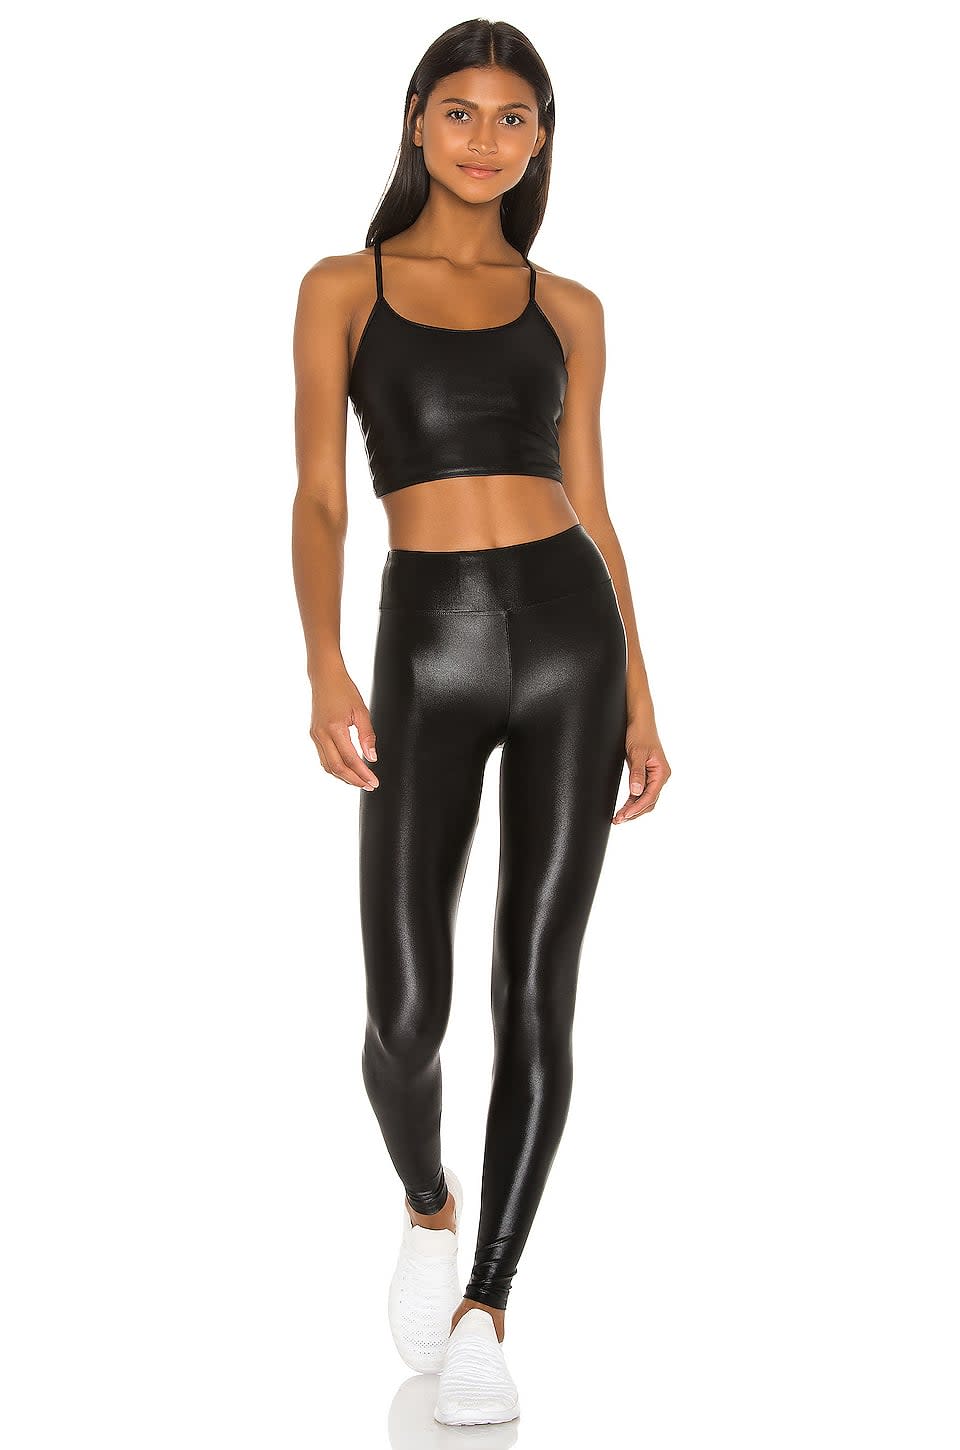 <p>This shiny <span>Koral Leah Infinity Sports Bra</span> ($65) and <span>Lustrous High Rise Legging</span> ($80) looks so good on. If you're working up a sweat, like in a hot yoga or boxing class, grab this set.</p>